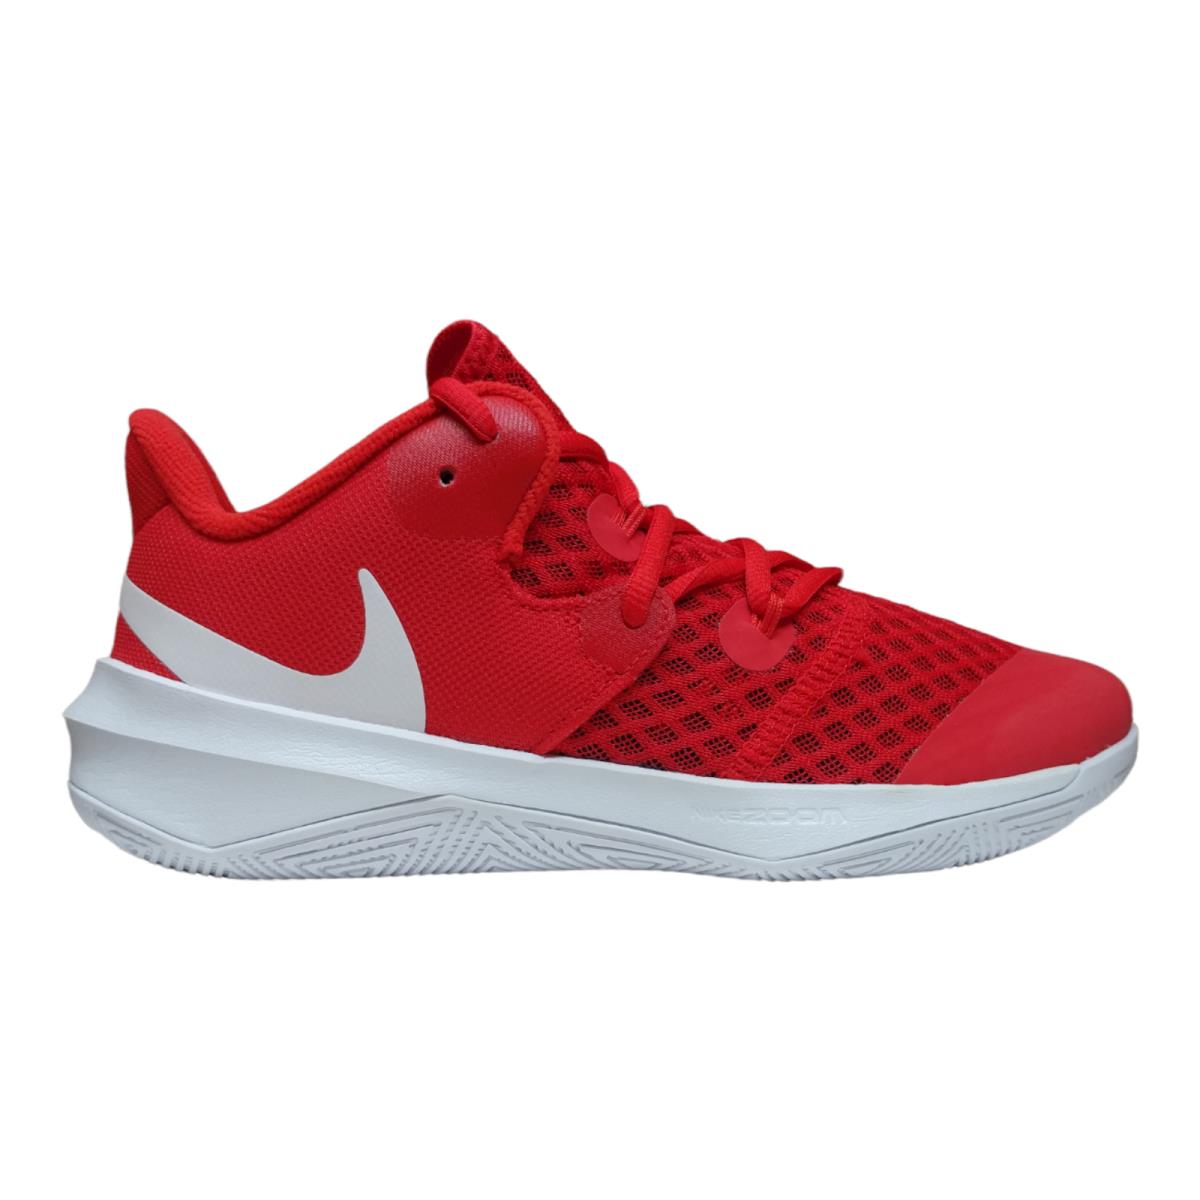 Nike Women`s Hyperspeed Court Athletic Shoe - US Size 8 Red CI2963-610 - Red